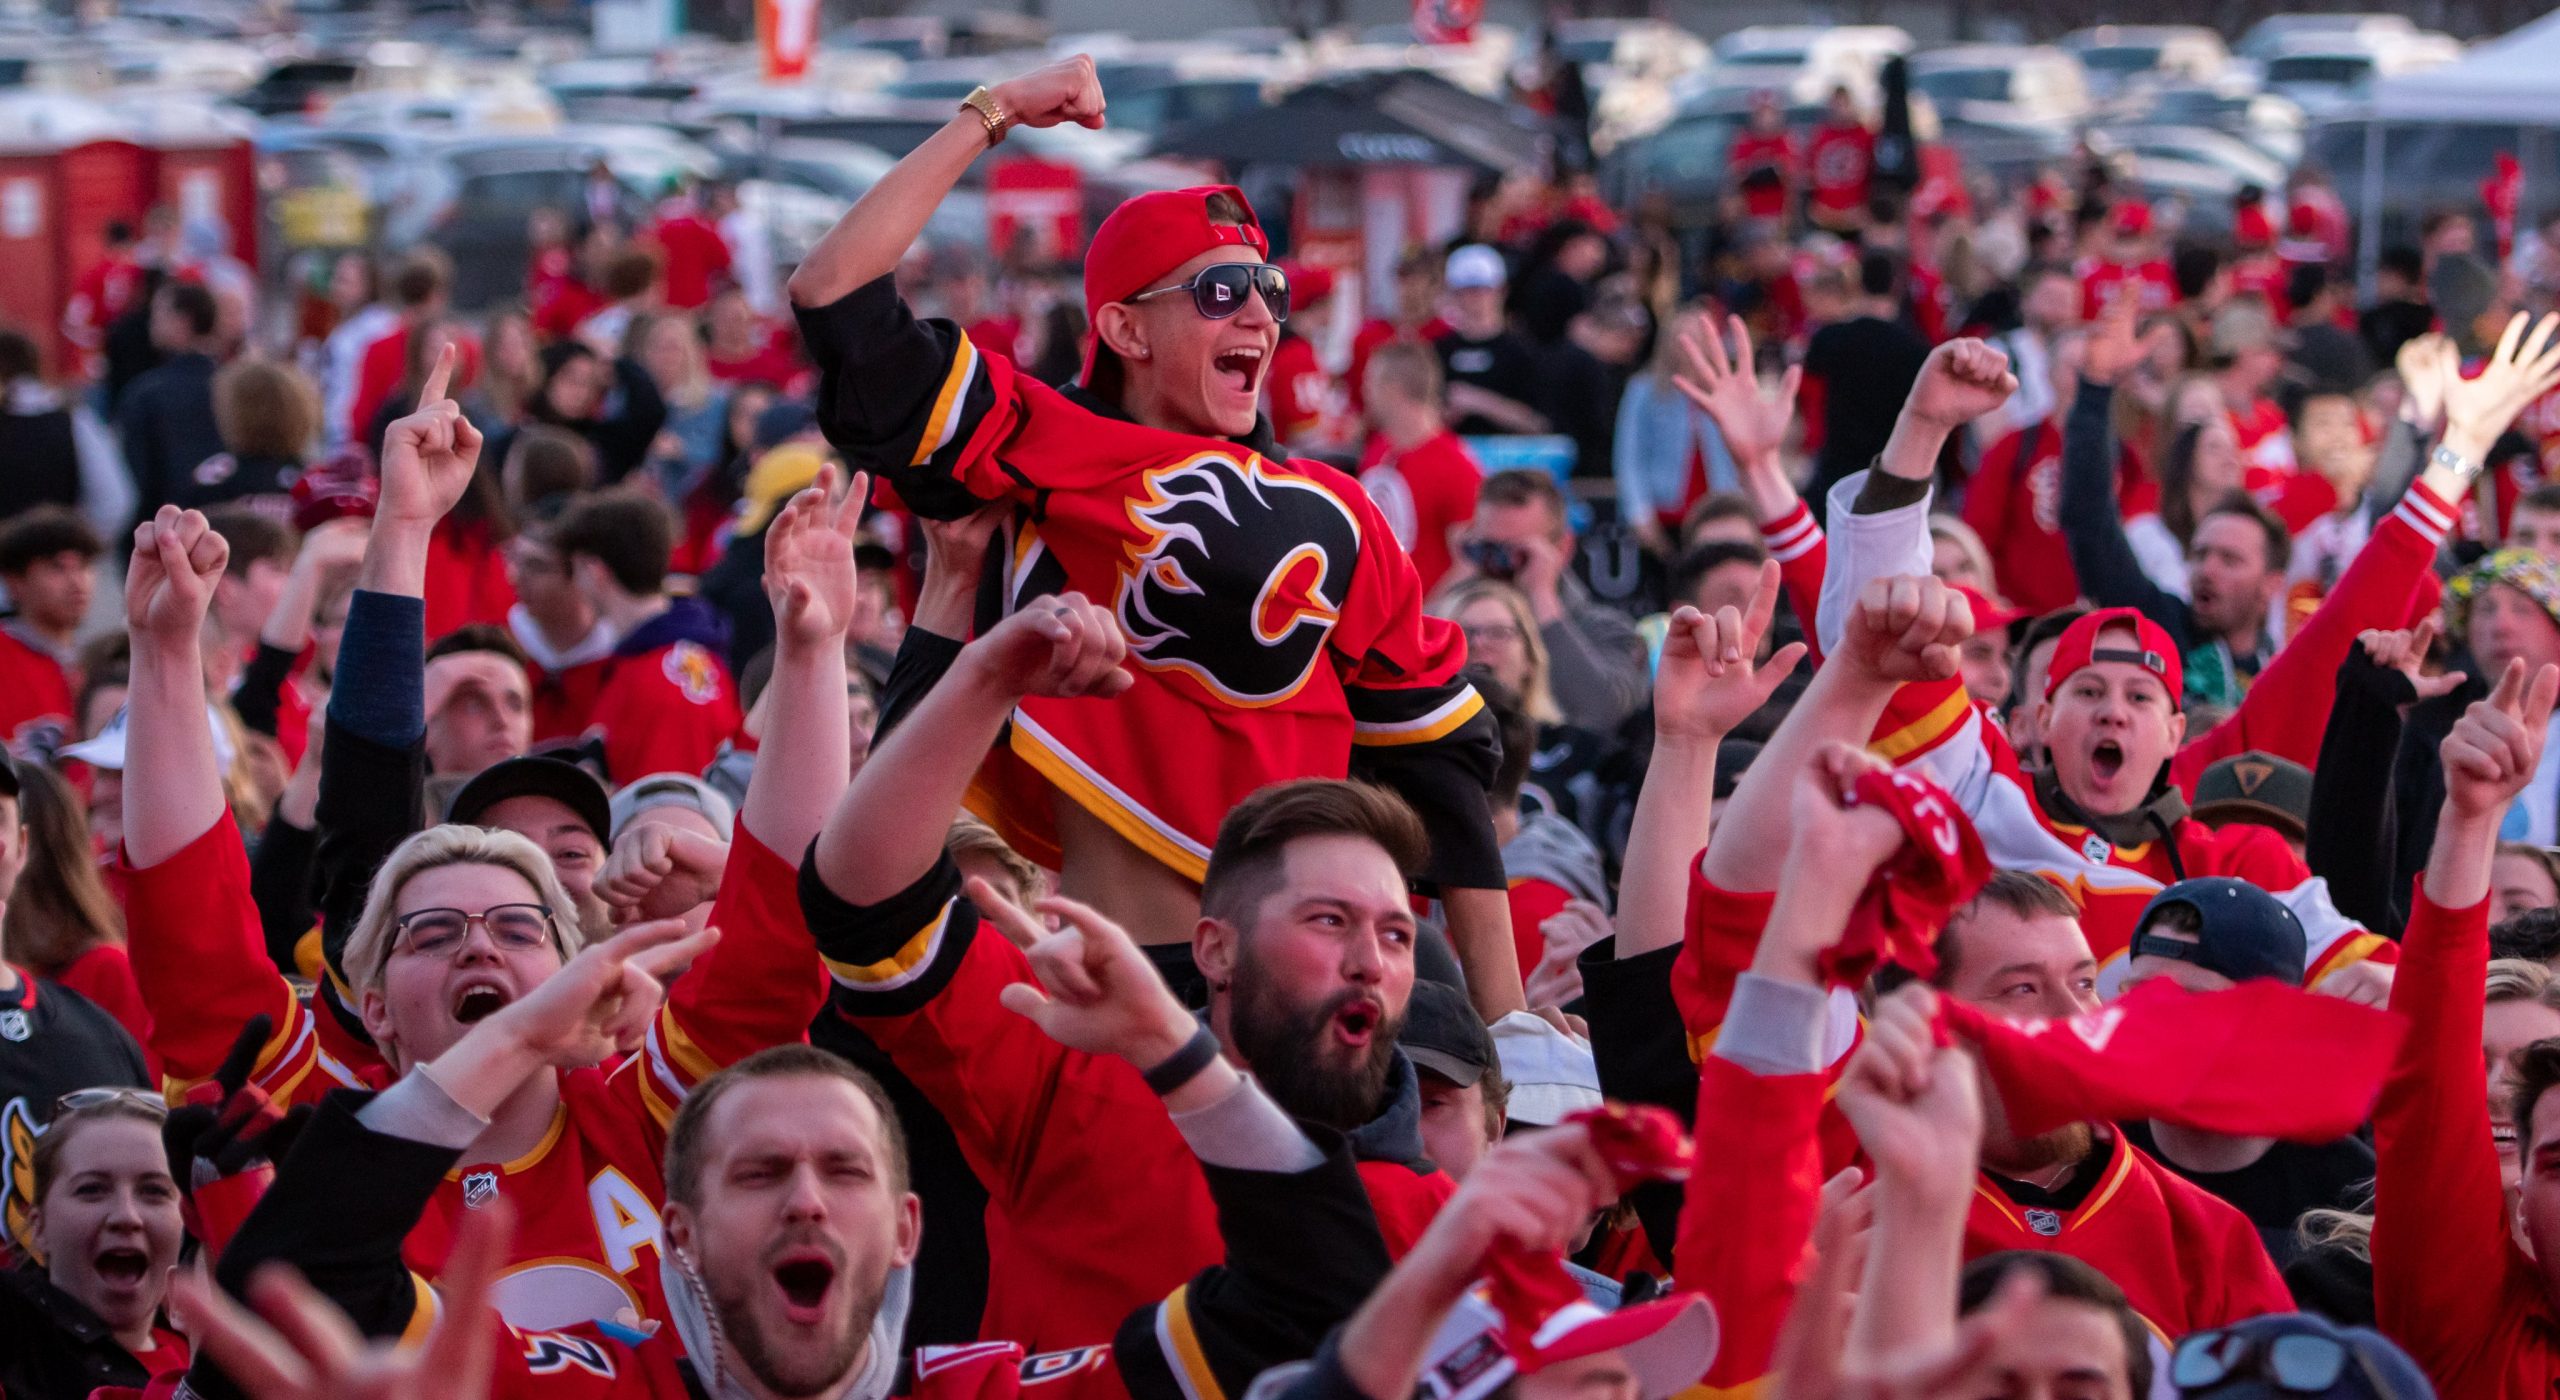 Live A Look At Calgary Flames Fans For Battle Of Alberta Game 4 In Edmonton